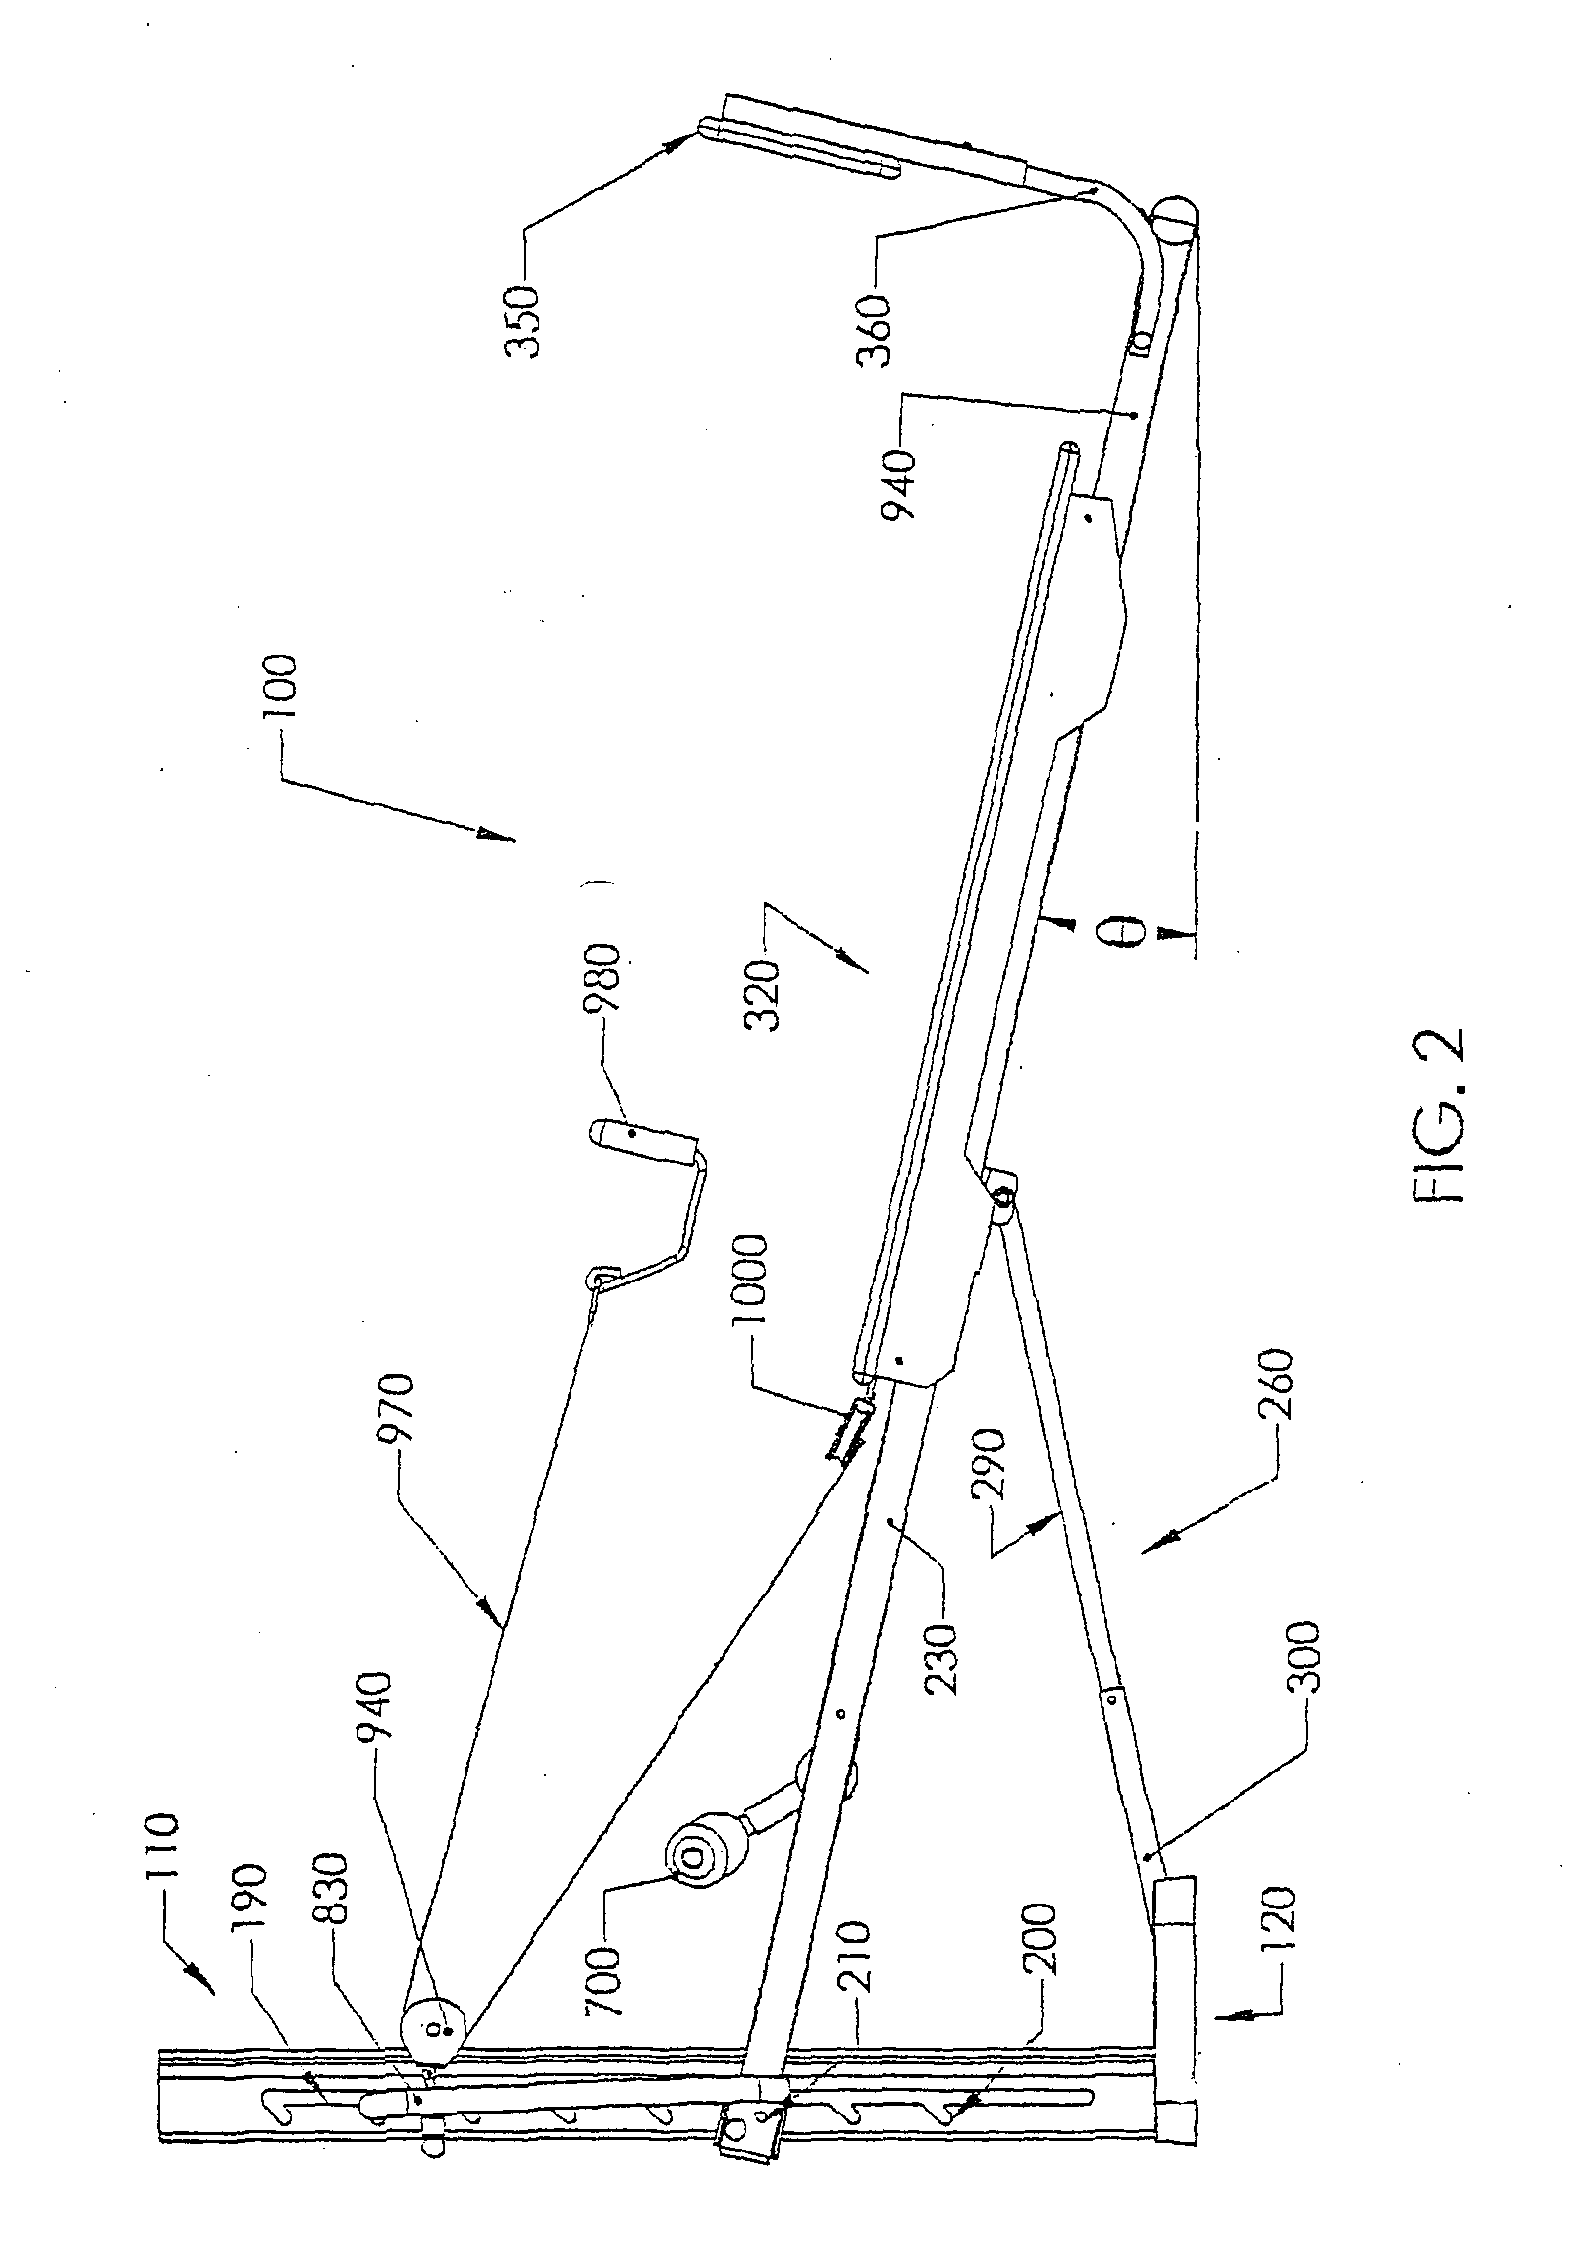 Method of Using an Exercise Device Having an Adjustable Incline